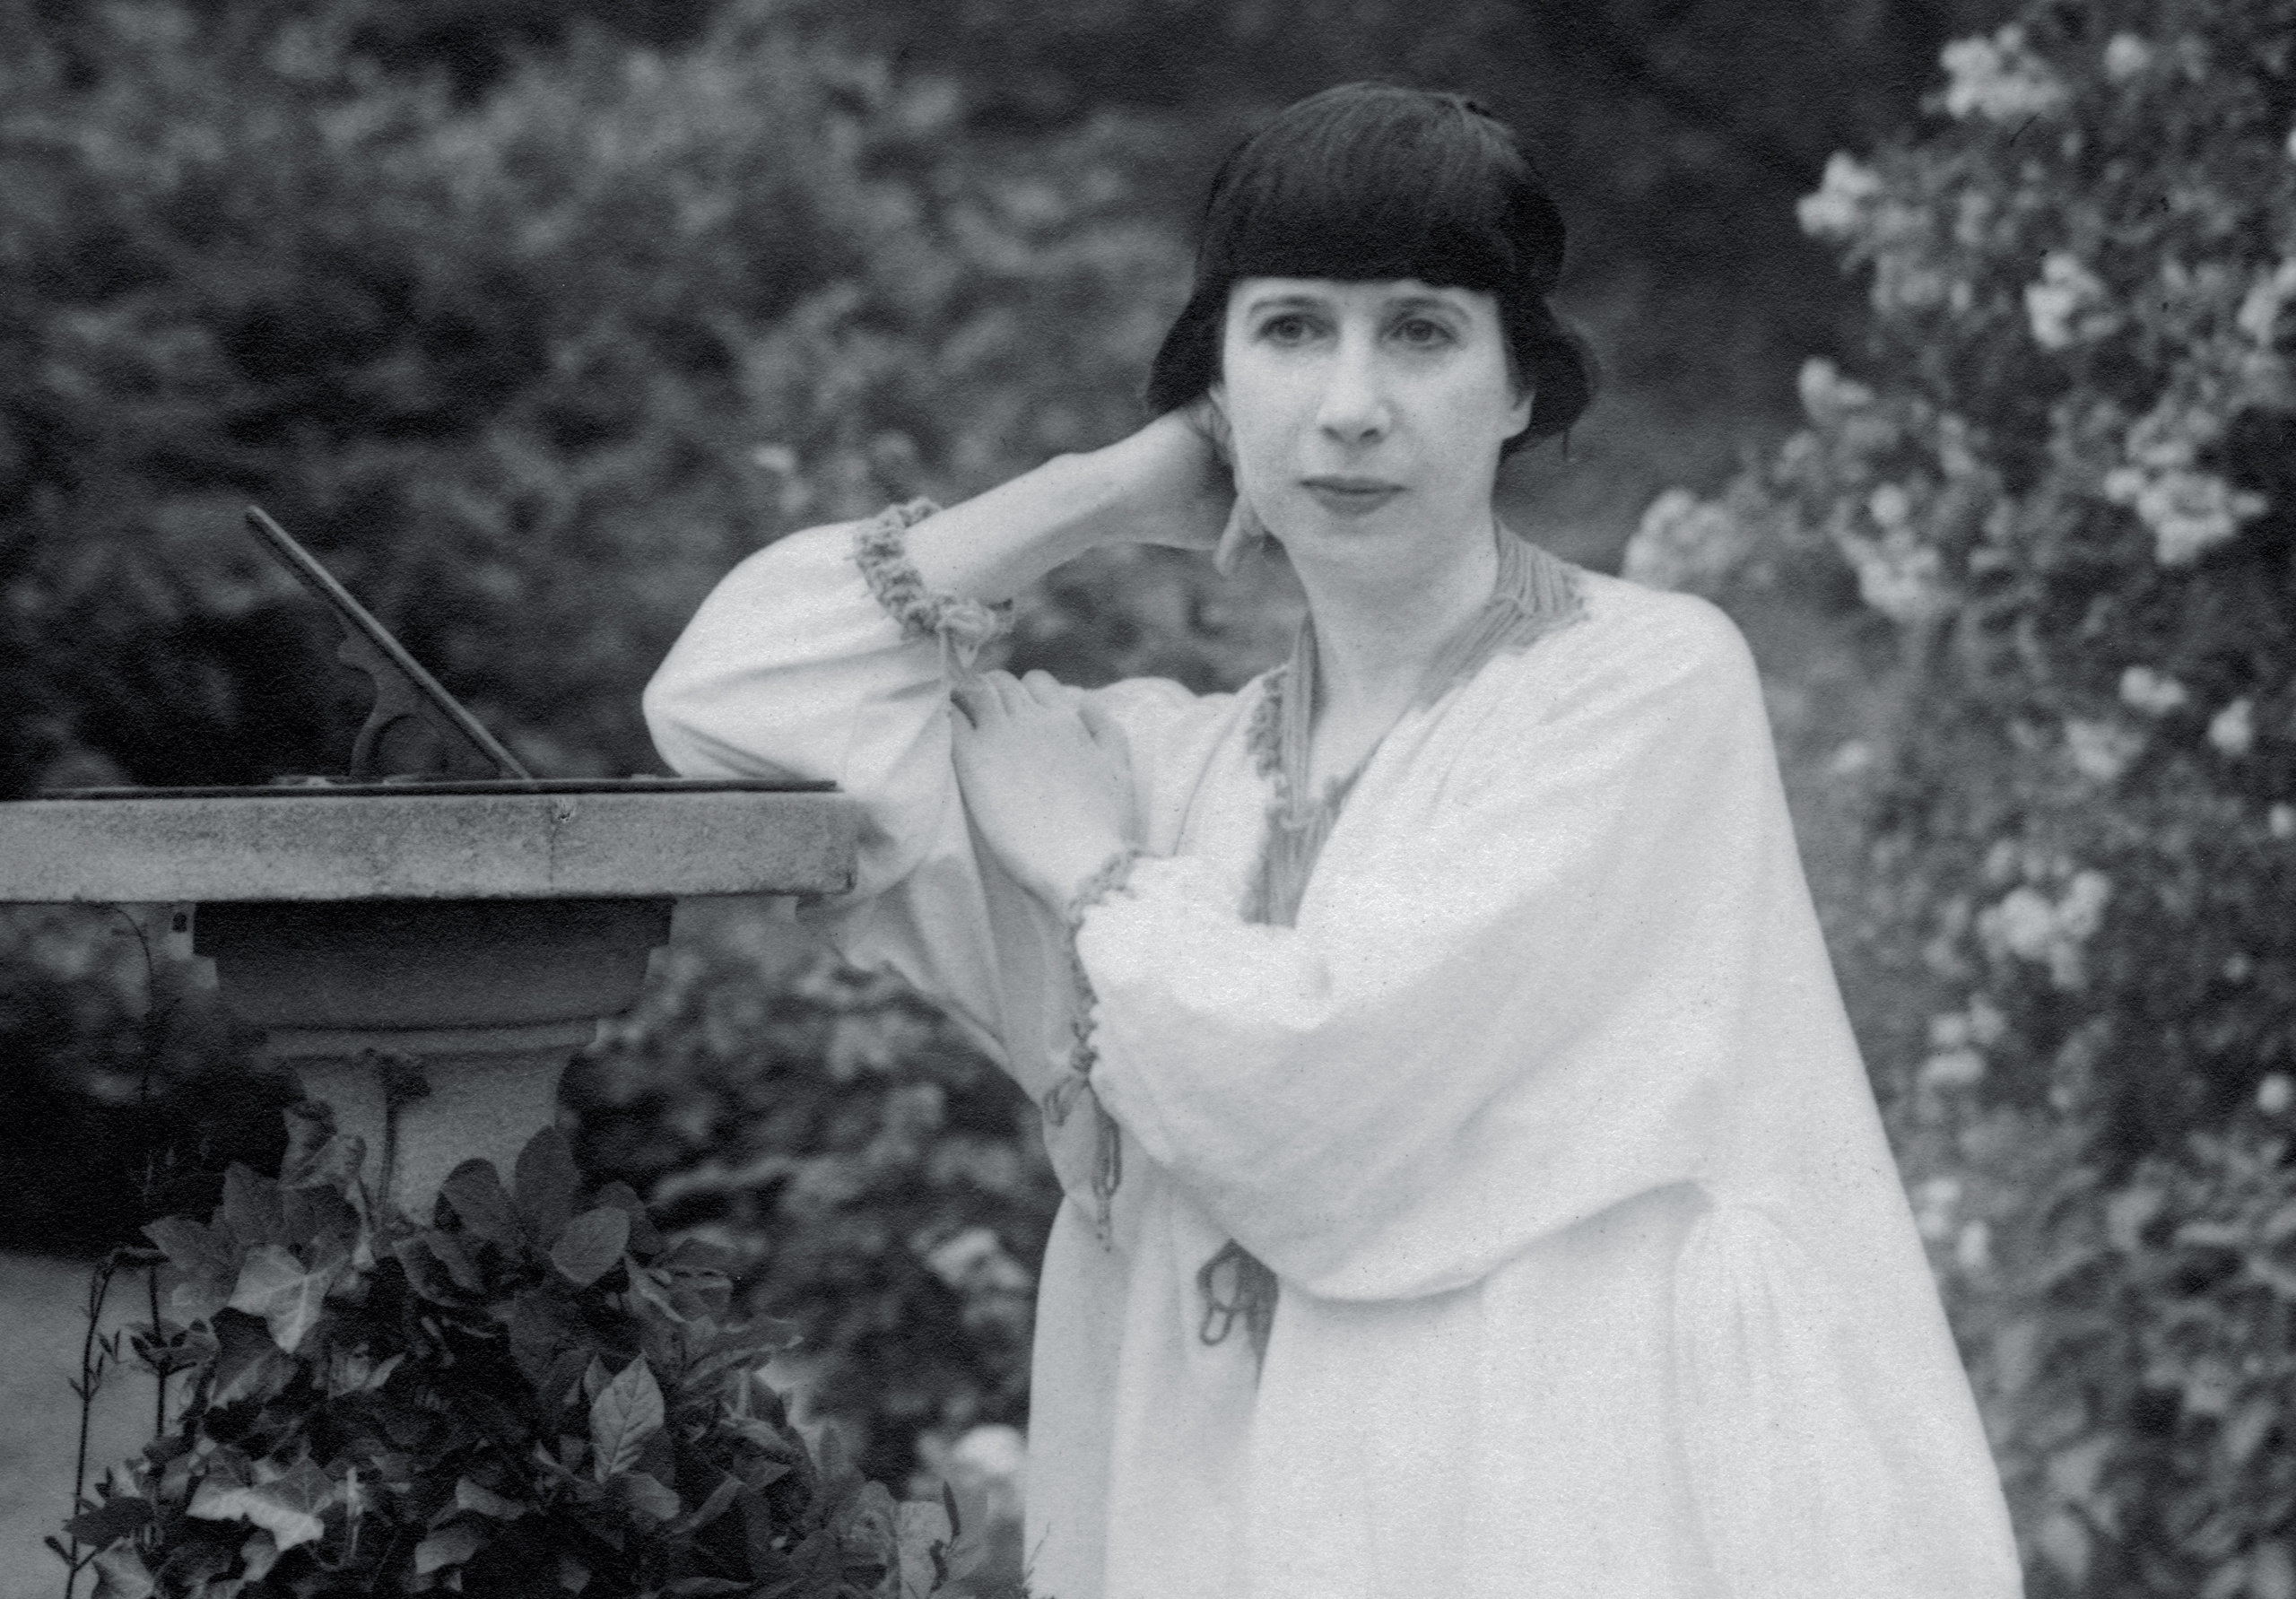 The life and work of Florine Stettheimer